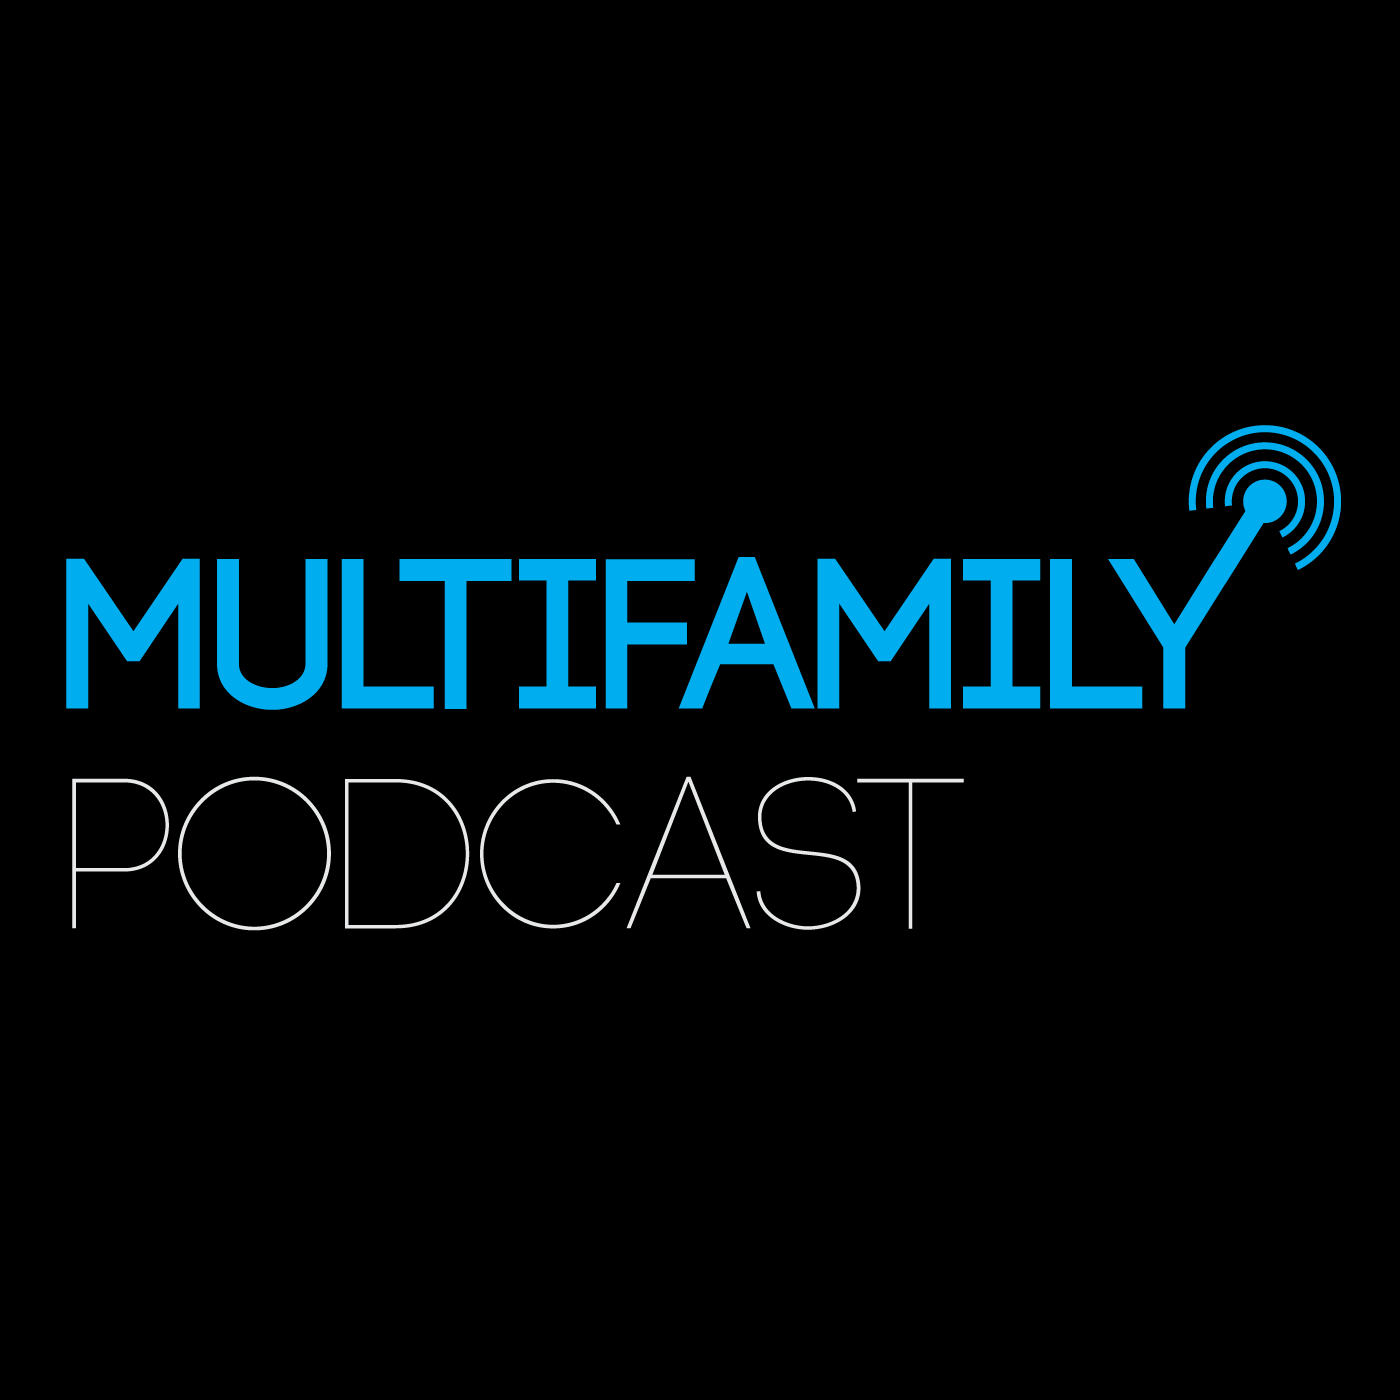 Multifamily Podcast Episode Five: Is SEO Really Dead? Part One